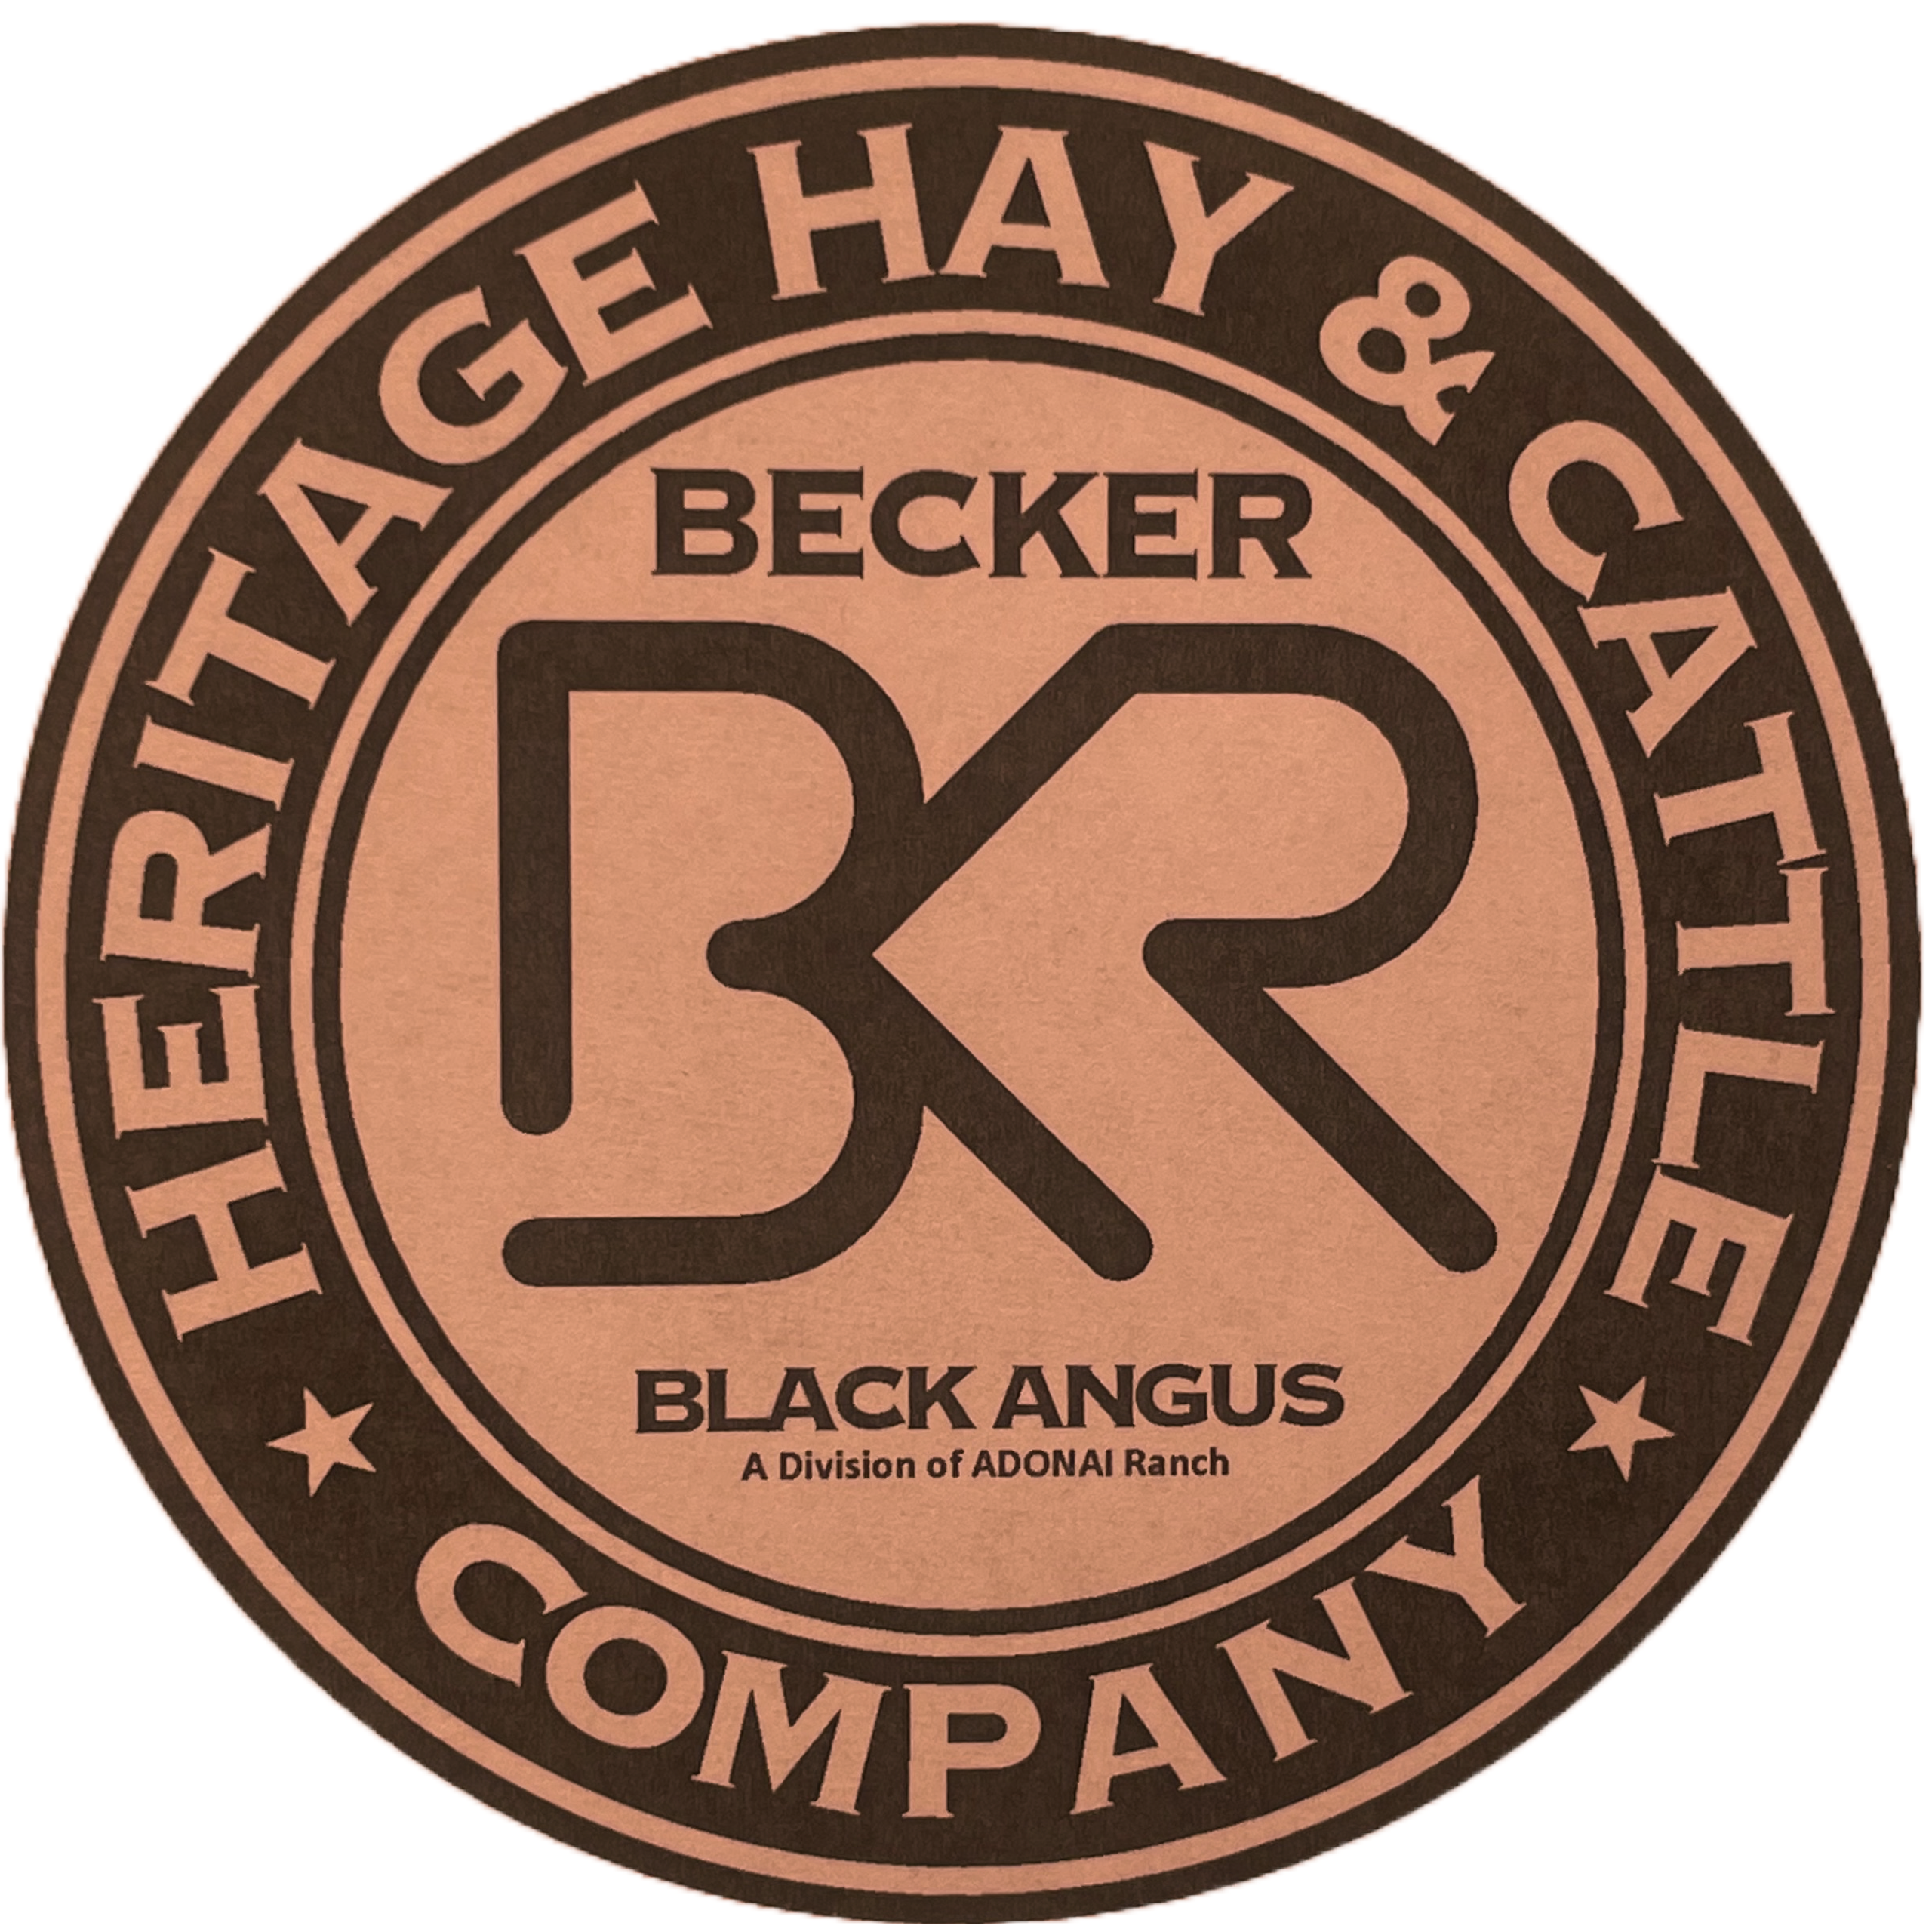 Heritage Hay & Cattle Co